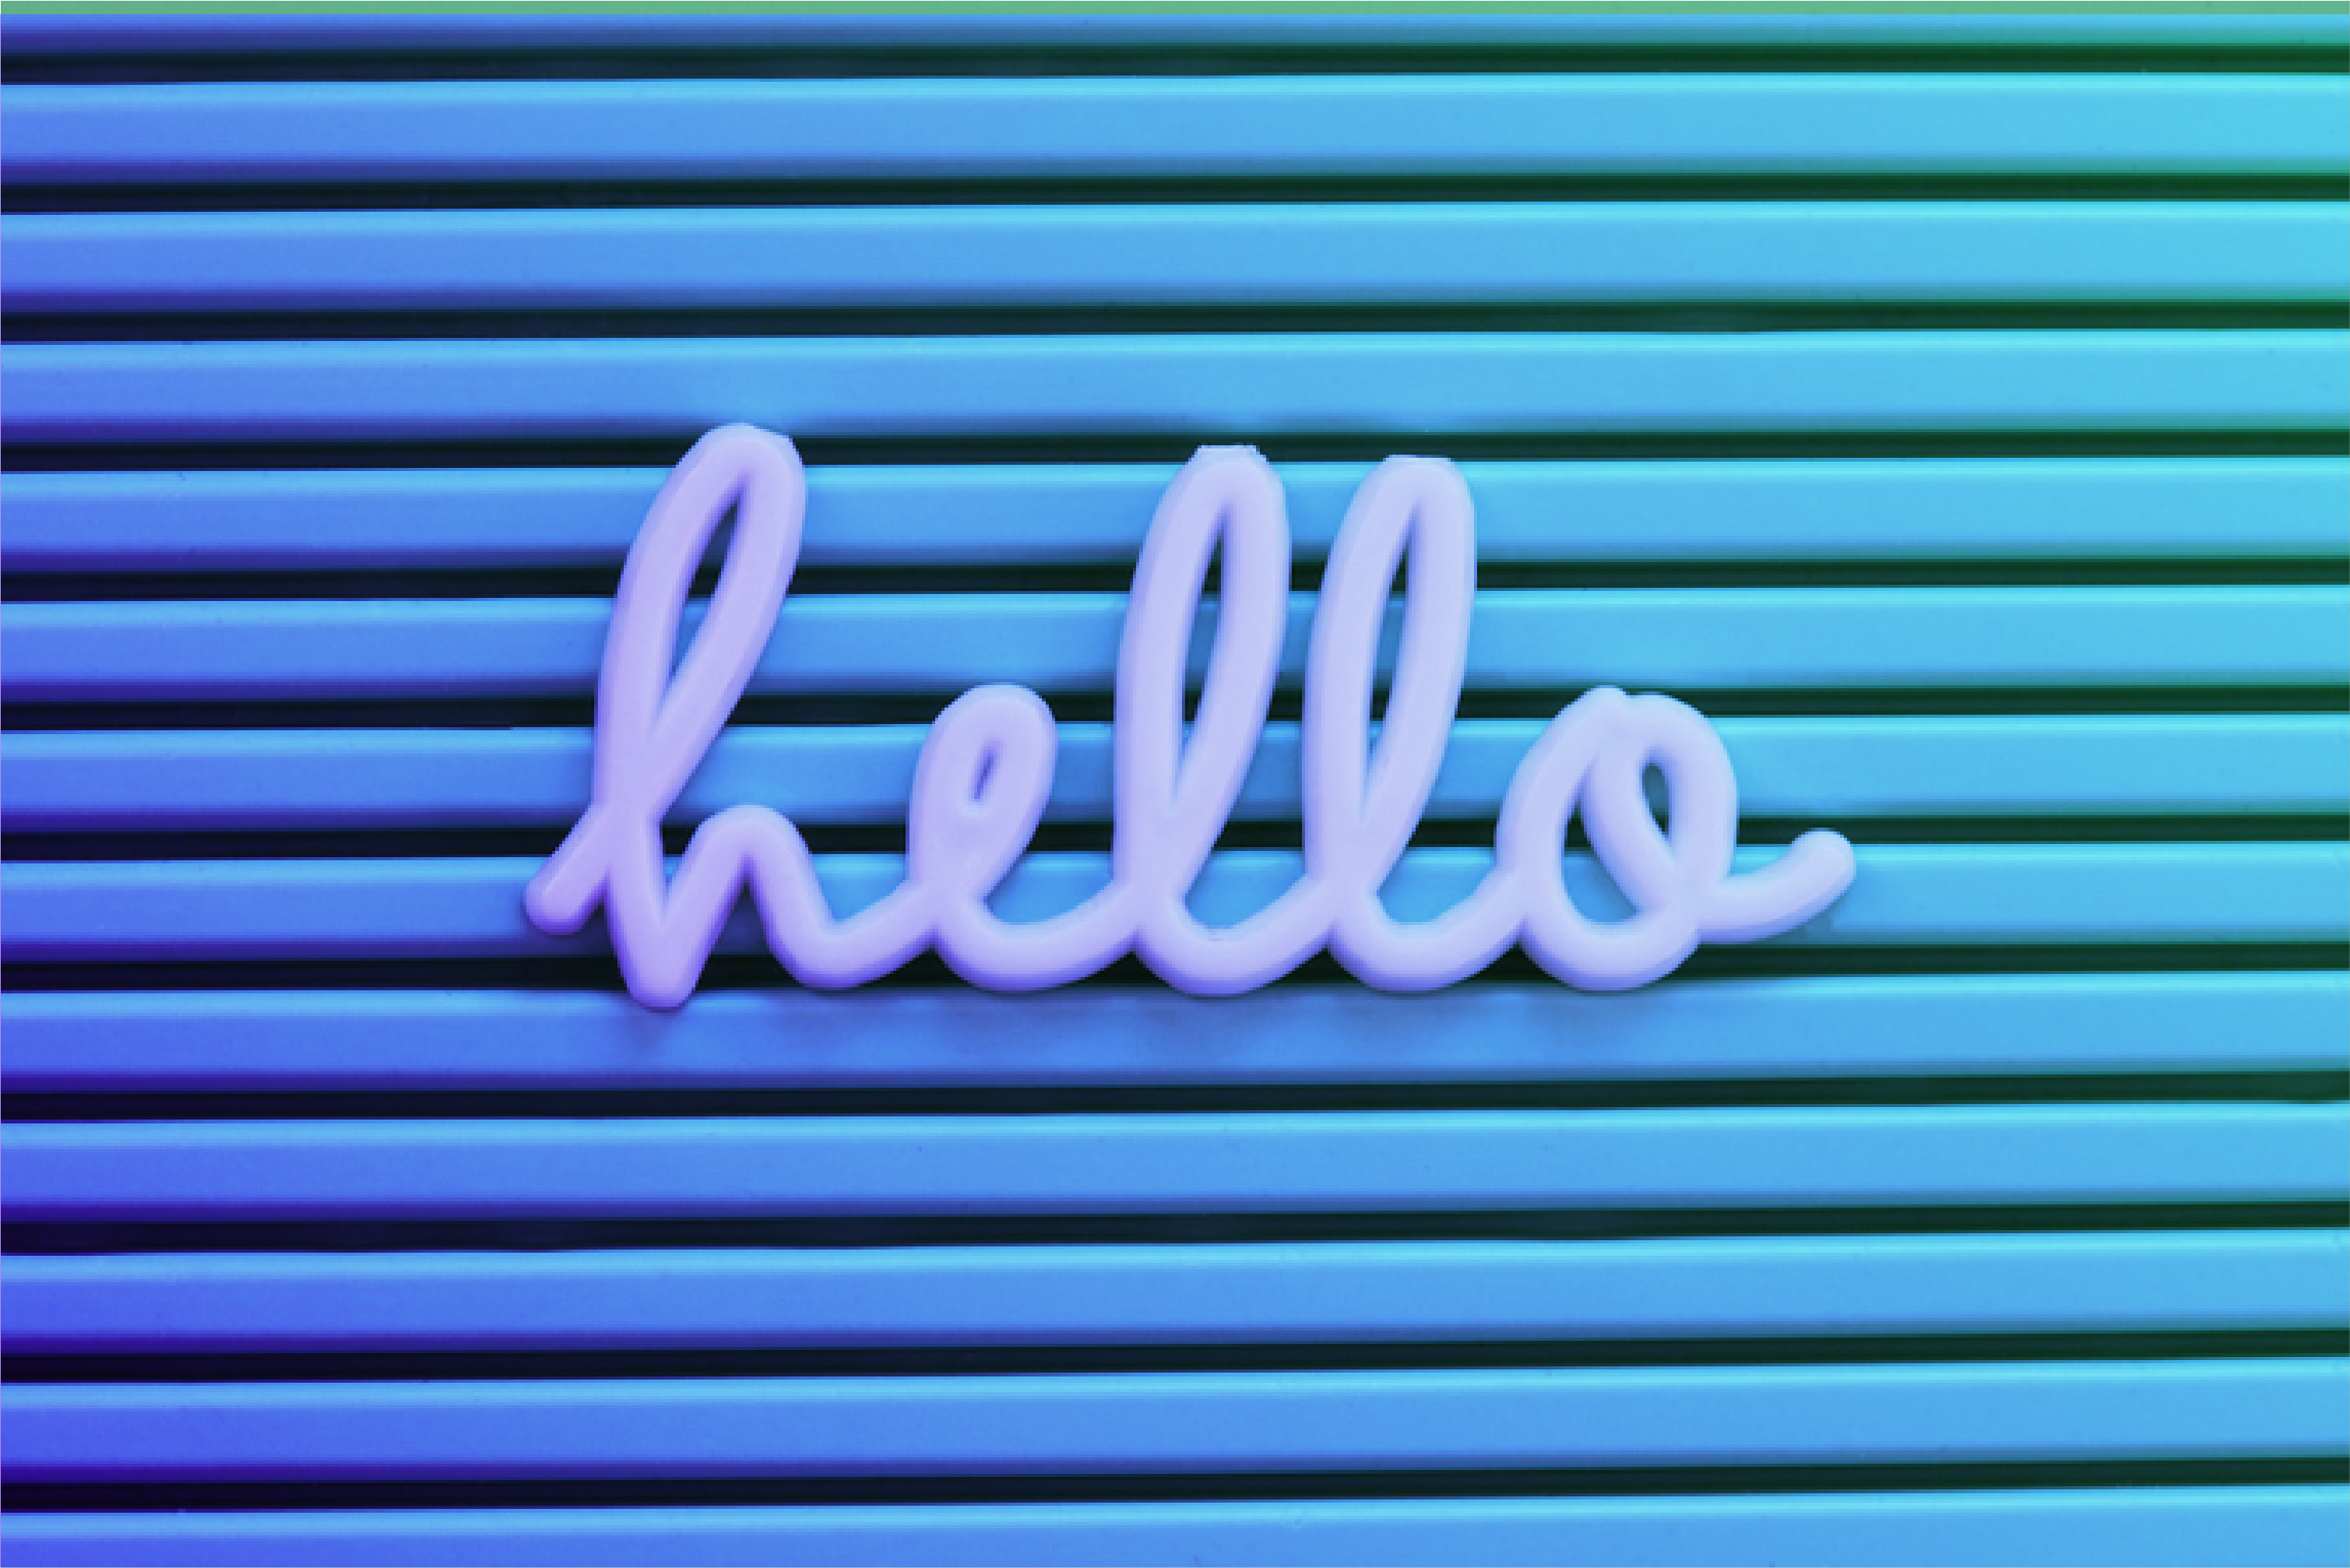 "Hello" written in lowercase scripted against a green and blue background